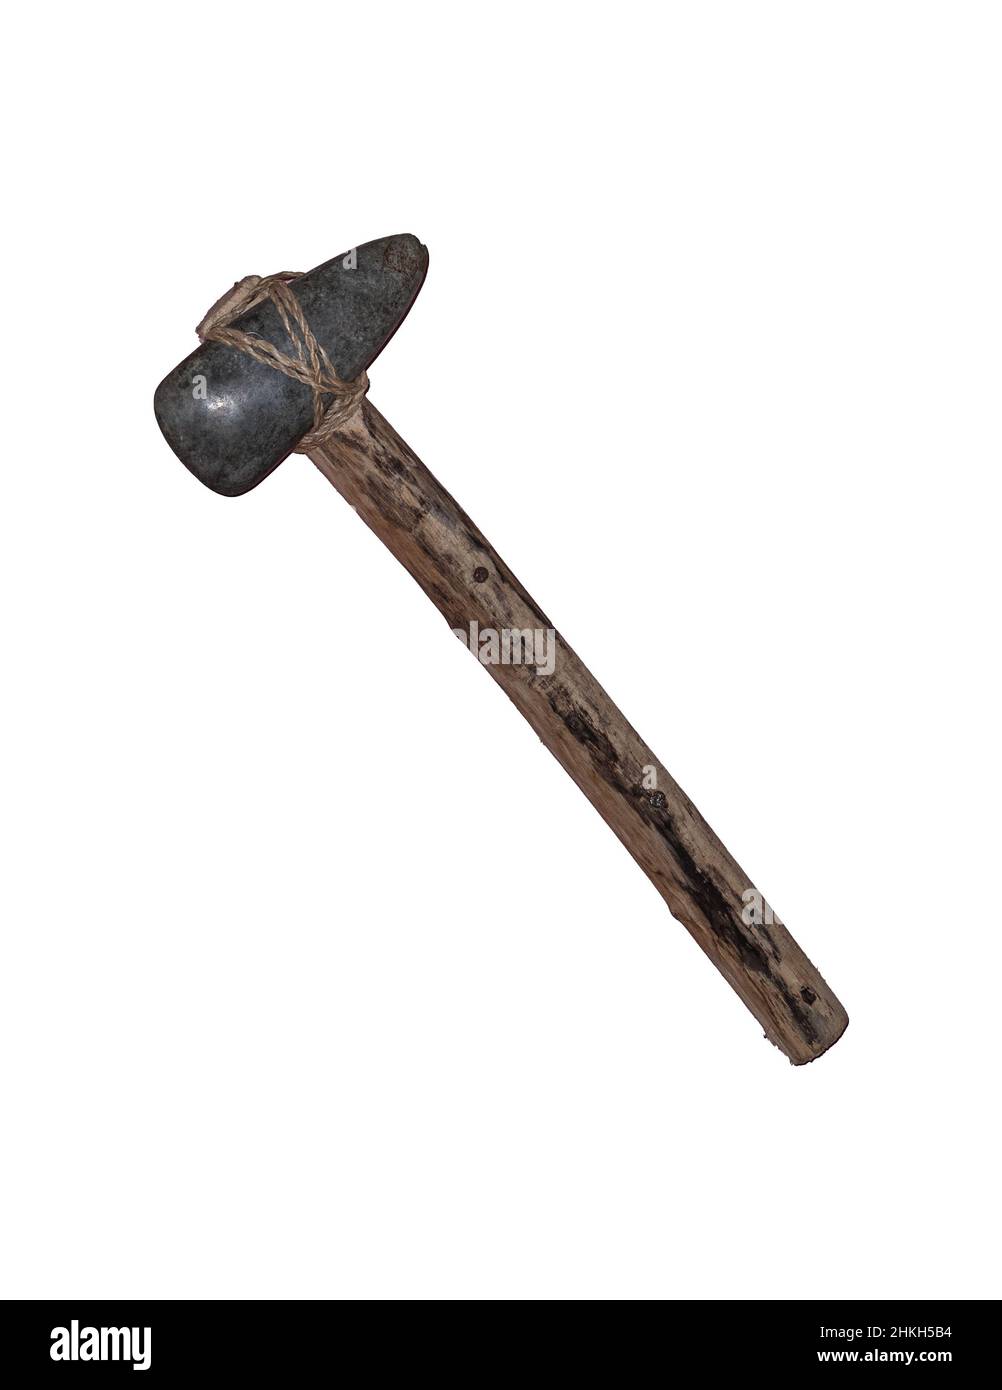 Honed and polished stone ax is mounted on a stick.  Cut out on white background. Stock Photo